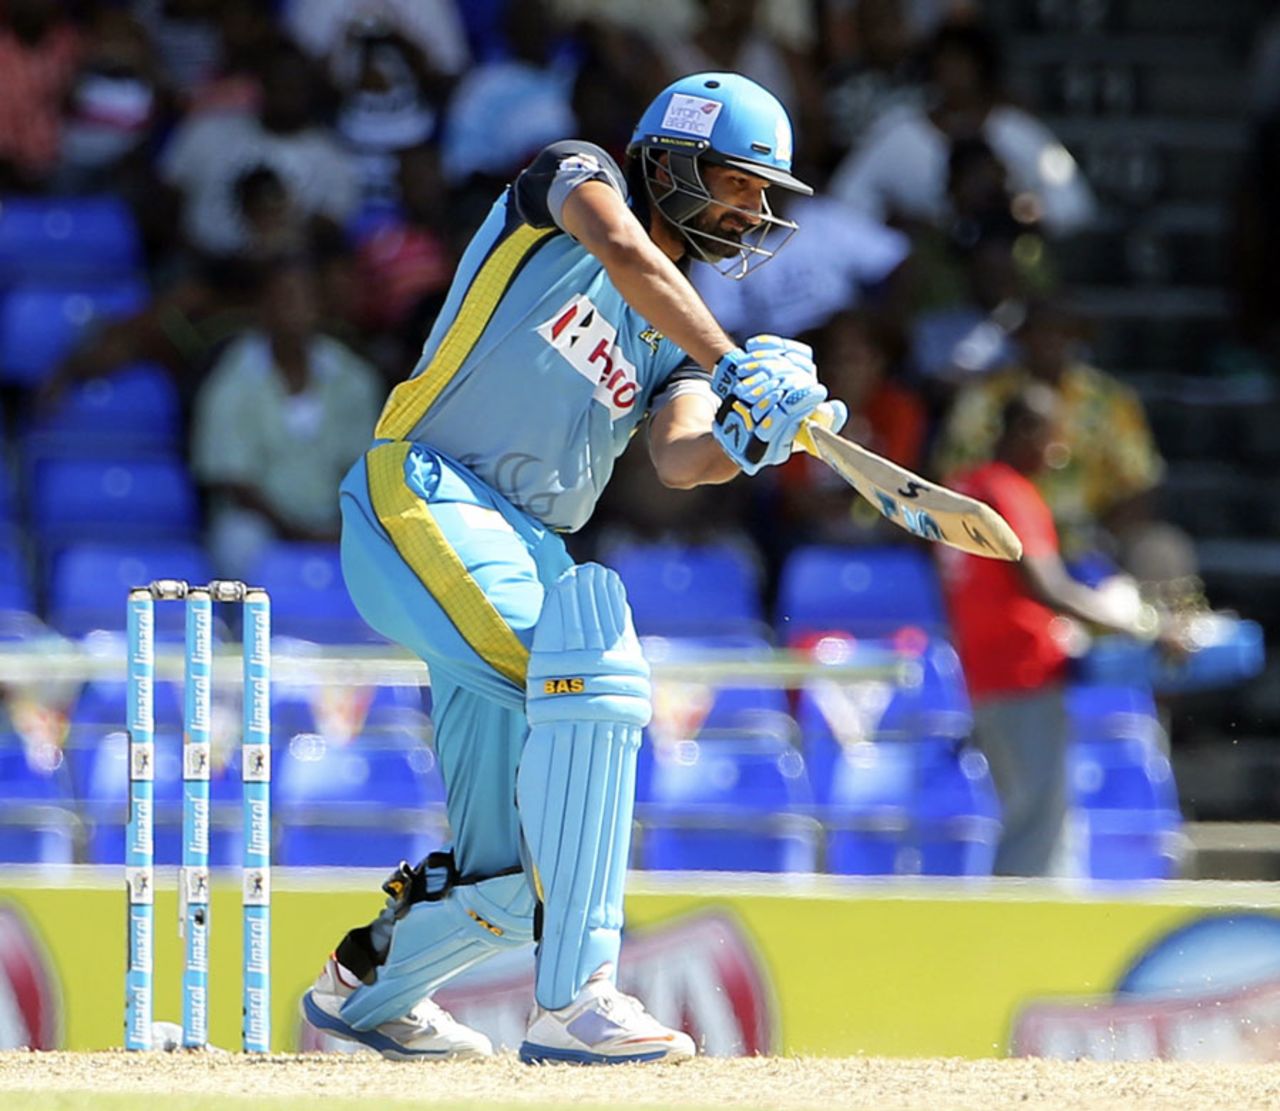 Sohail Tanvir smacked a 7-ball 20 at the end of the innings, St Lucia Zouks v Jamaica Tallawahs, CPL, St Kitts, August 9, 2014